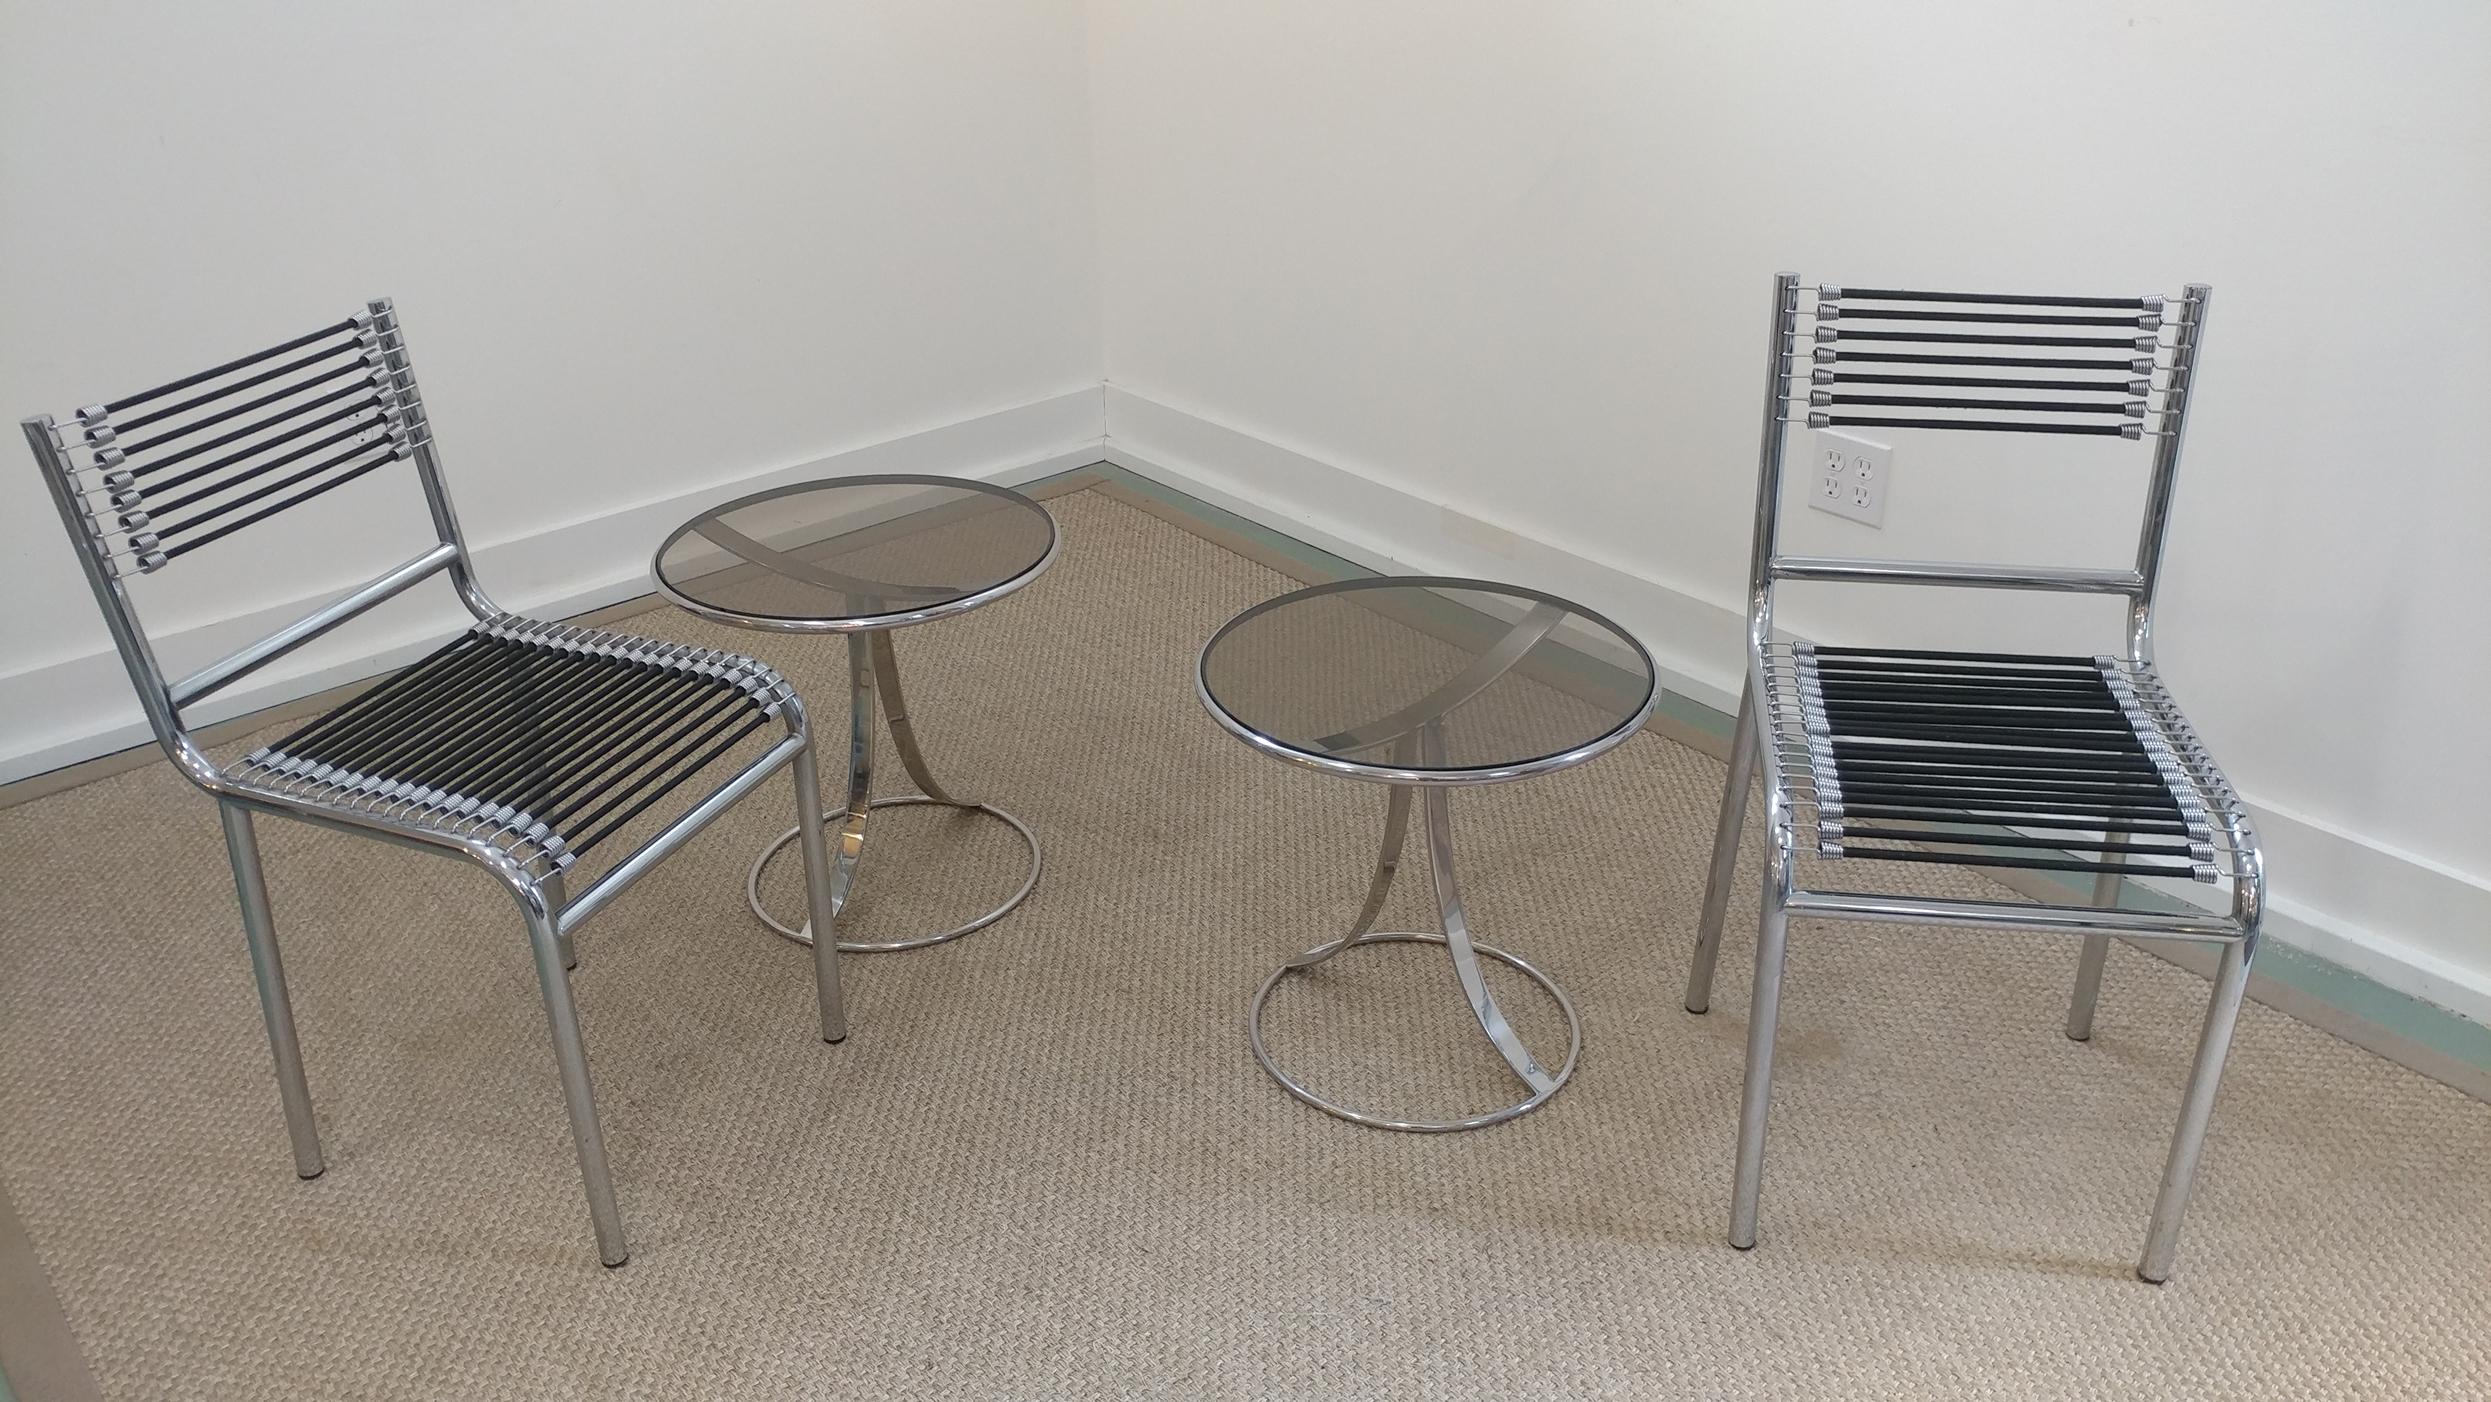 A pair of great looking modern side cocktail tables by Gardner Leaver for Steelcase, circa 1970s. Smoke glass on stainless sculptural frame. In all original overall good condition despite one of the glass's edge have small chip. But its not